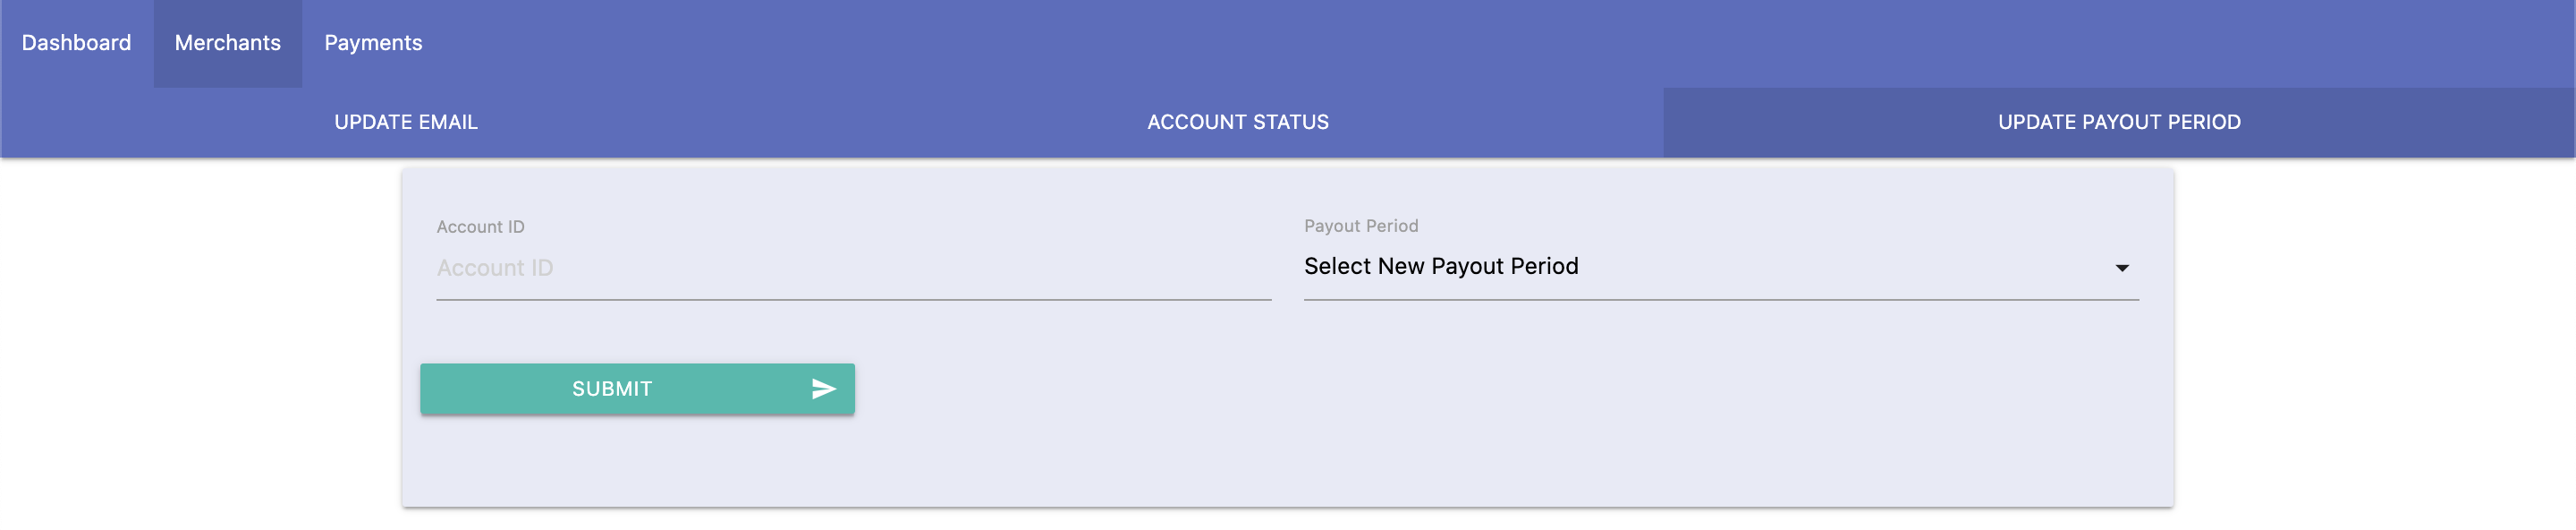 How to update a merchant's payout period from WePay's Partner Center.